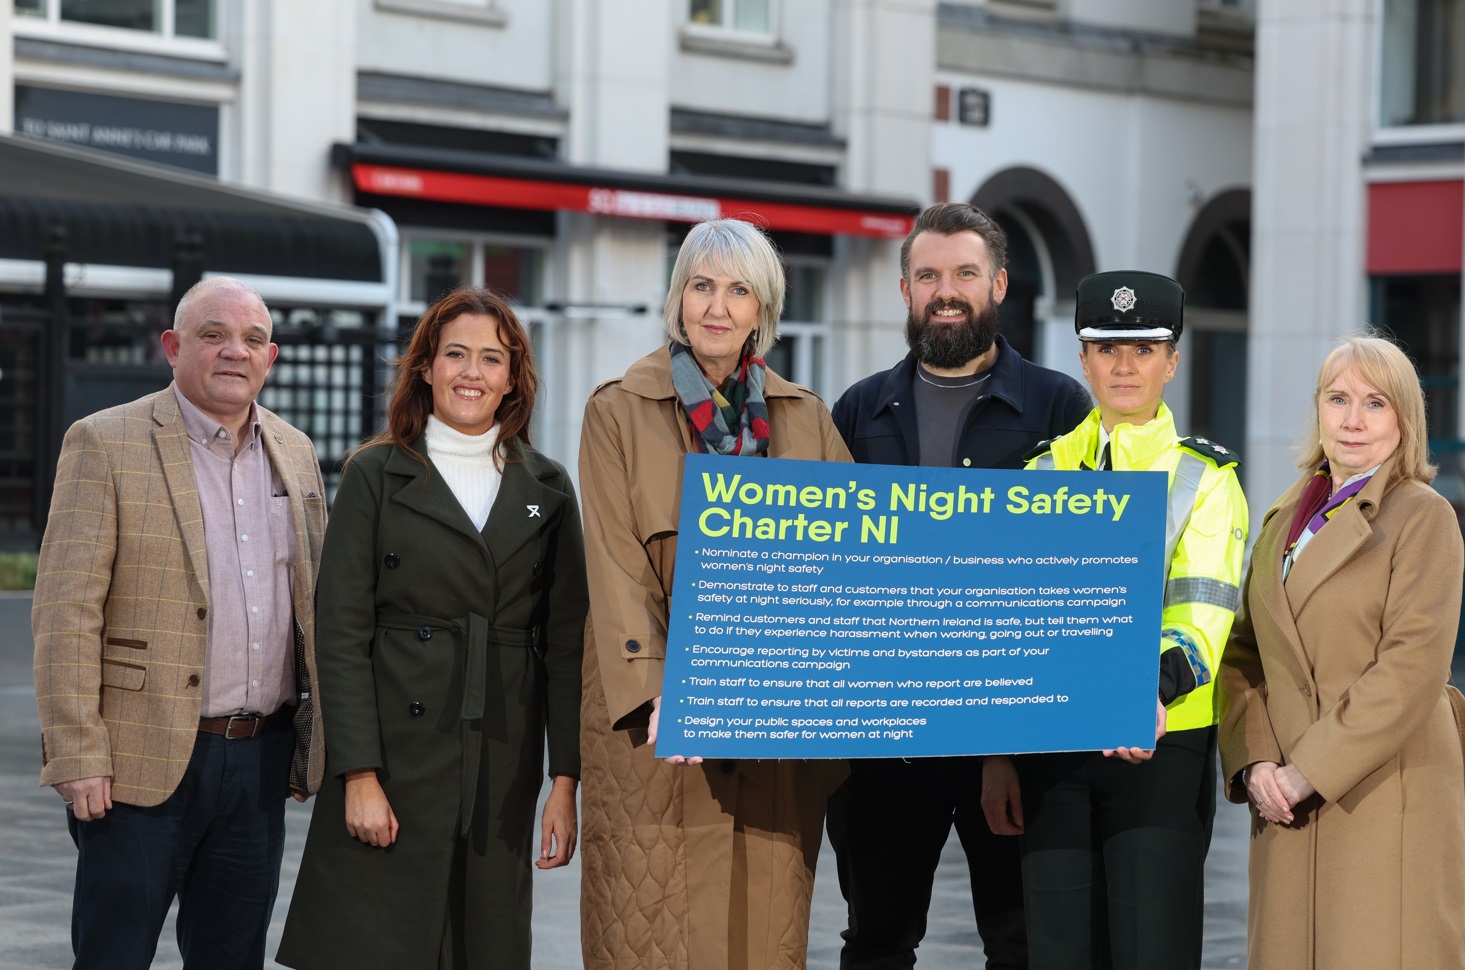 LAUNCH OF NEW CHARTER TO PRIORITISE SAFETY OF WOMEN AT NIGHT